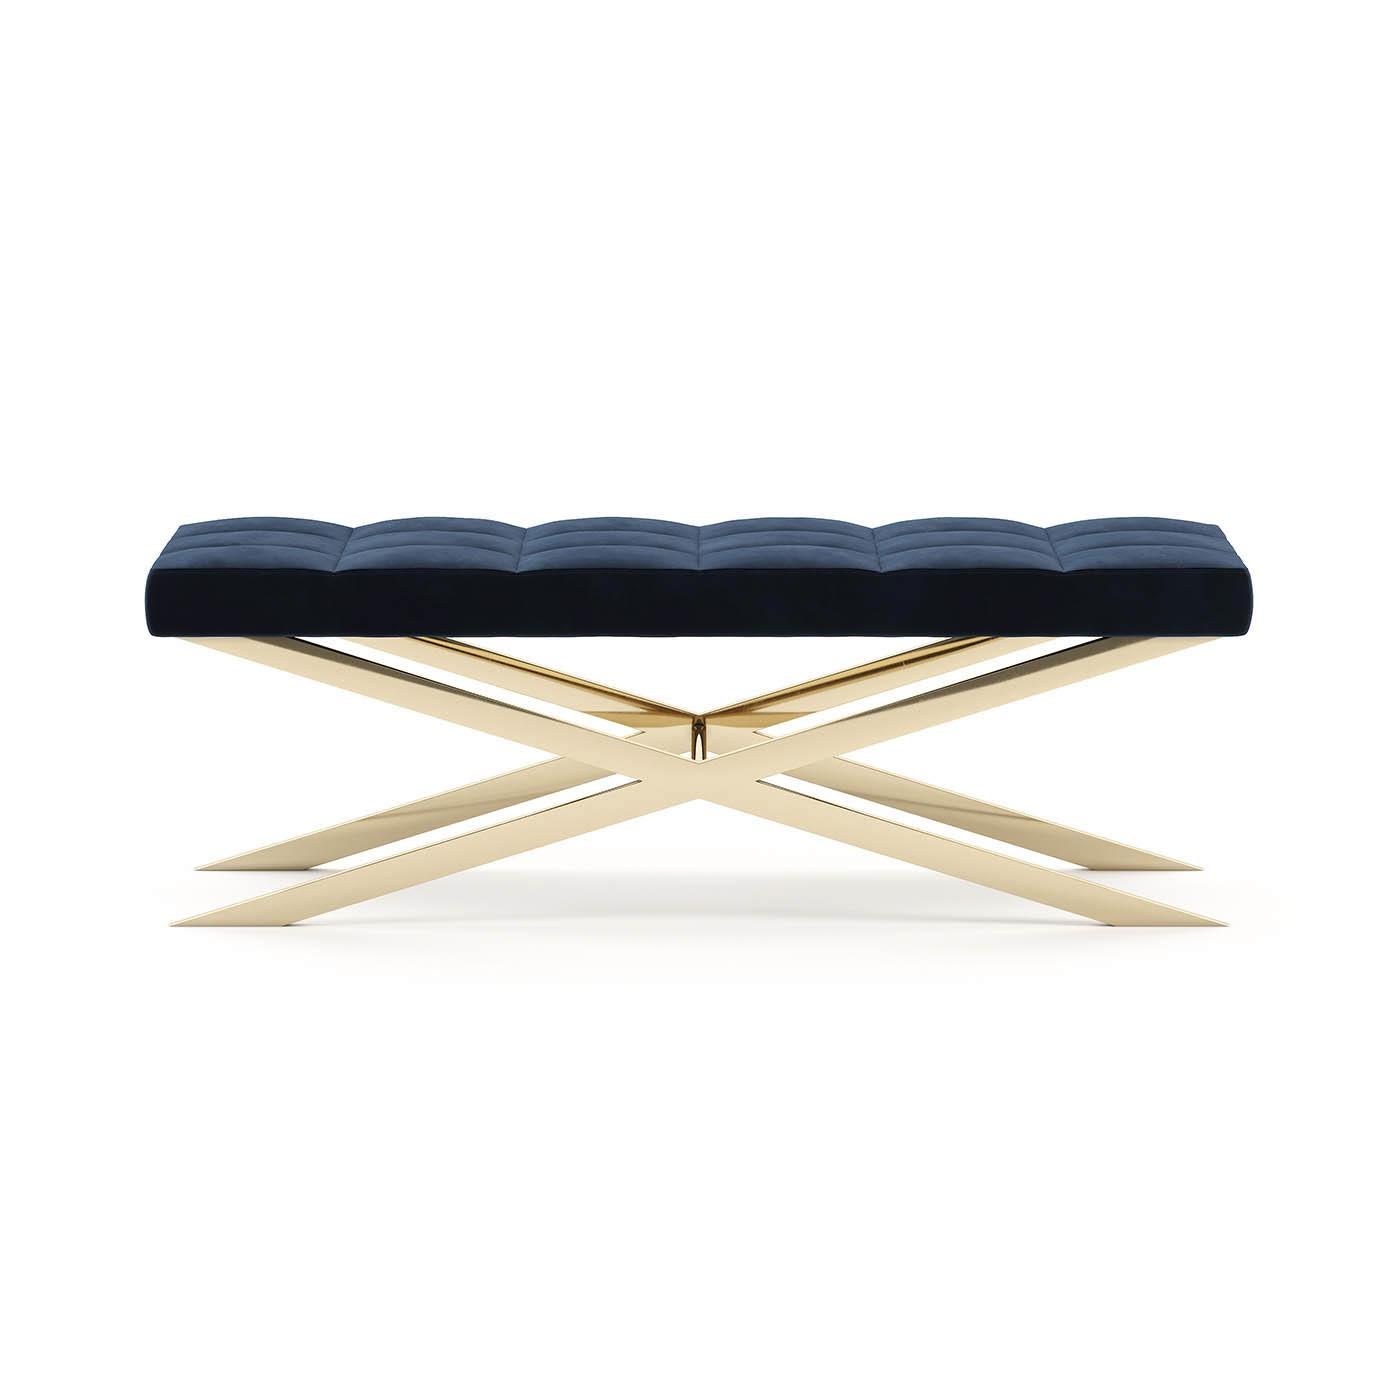 Bench Hilton X with structure in polished
stainless steel in gold finish. With upholstered
seat covered with high quality blue fabric.
Also available with other fabric's color on request.